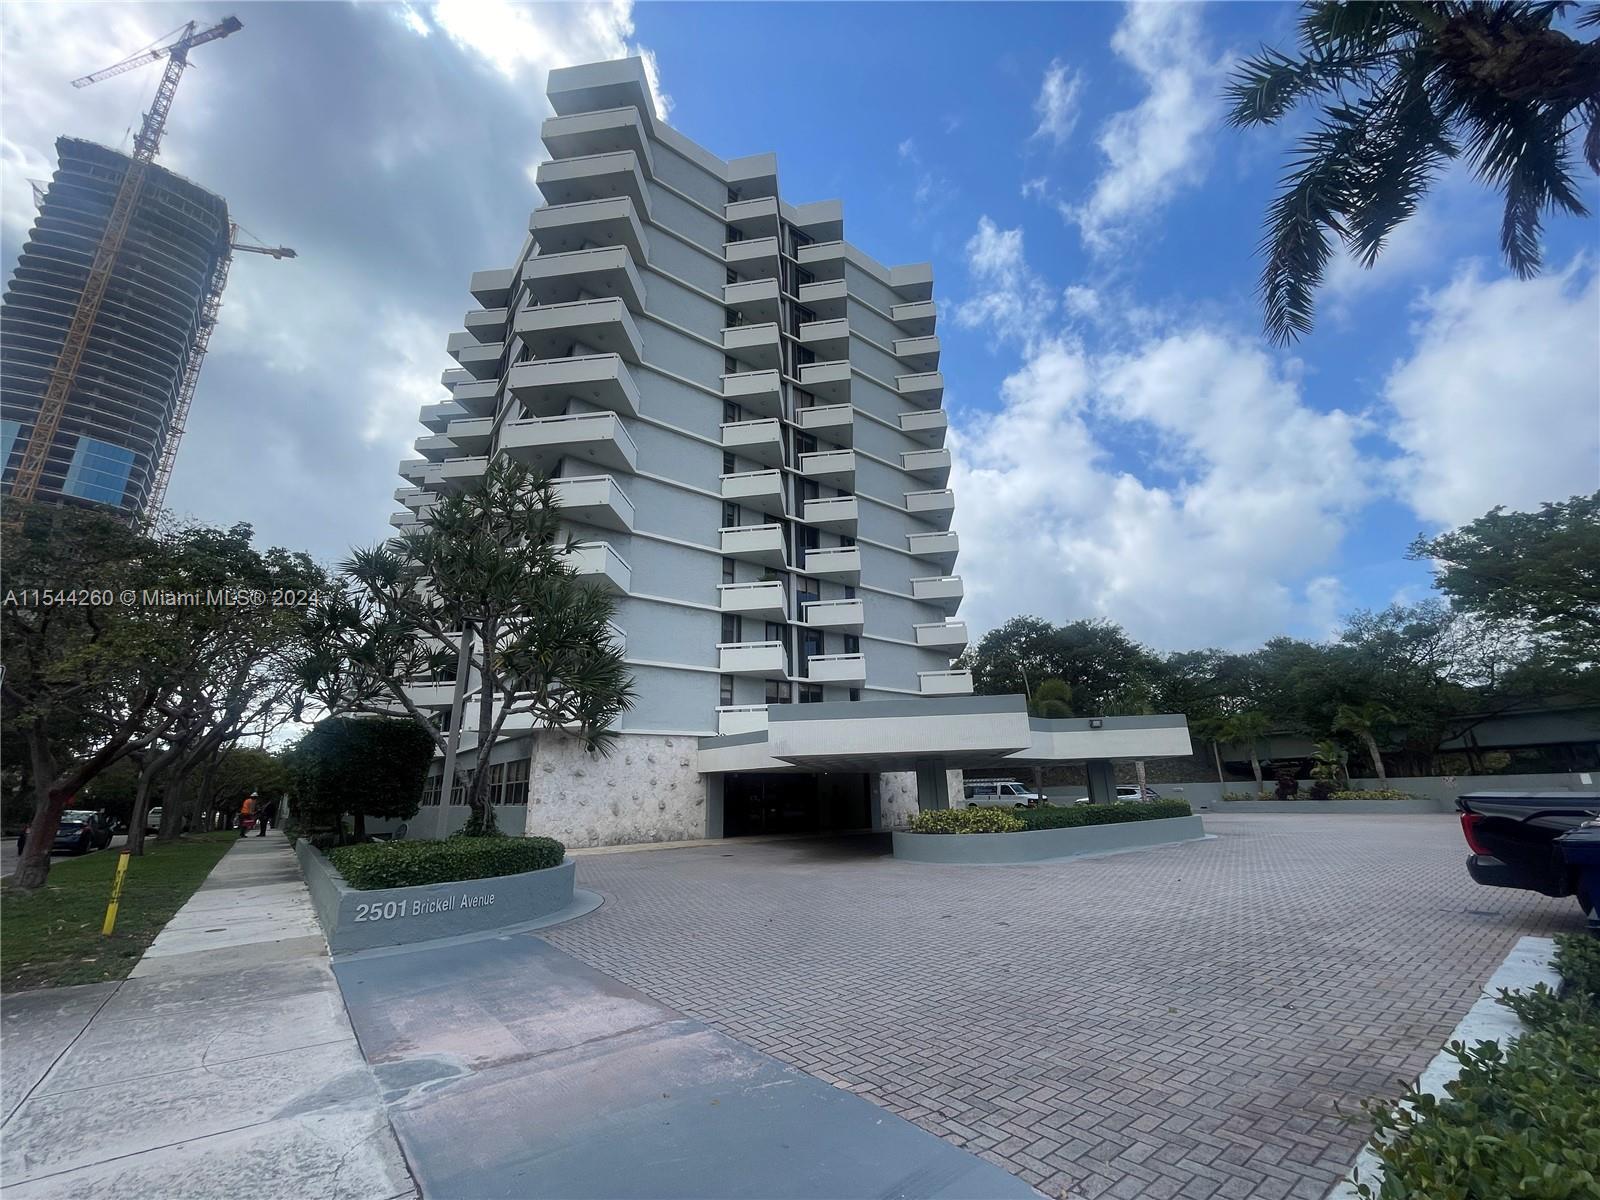 Don't let this rare gem slip away! Nestled in the heart of Brickell Avenue, this stunning corner uni